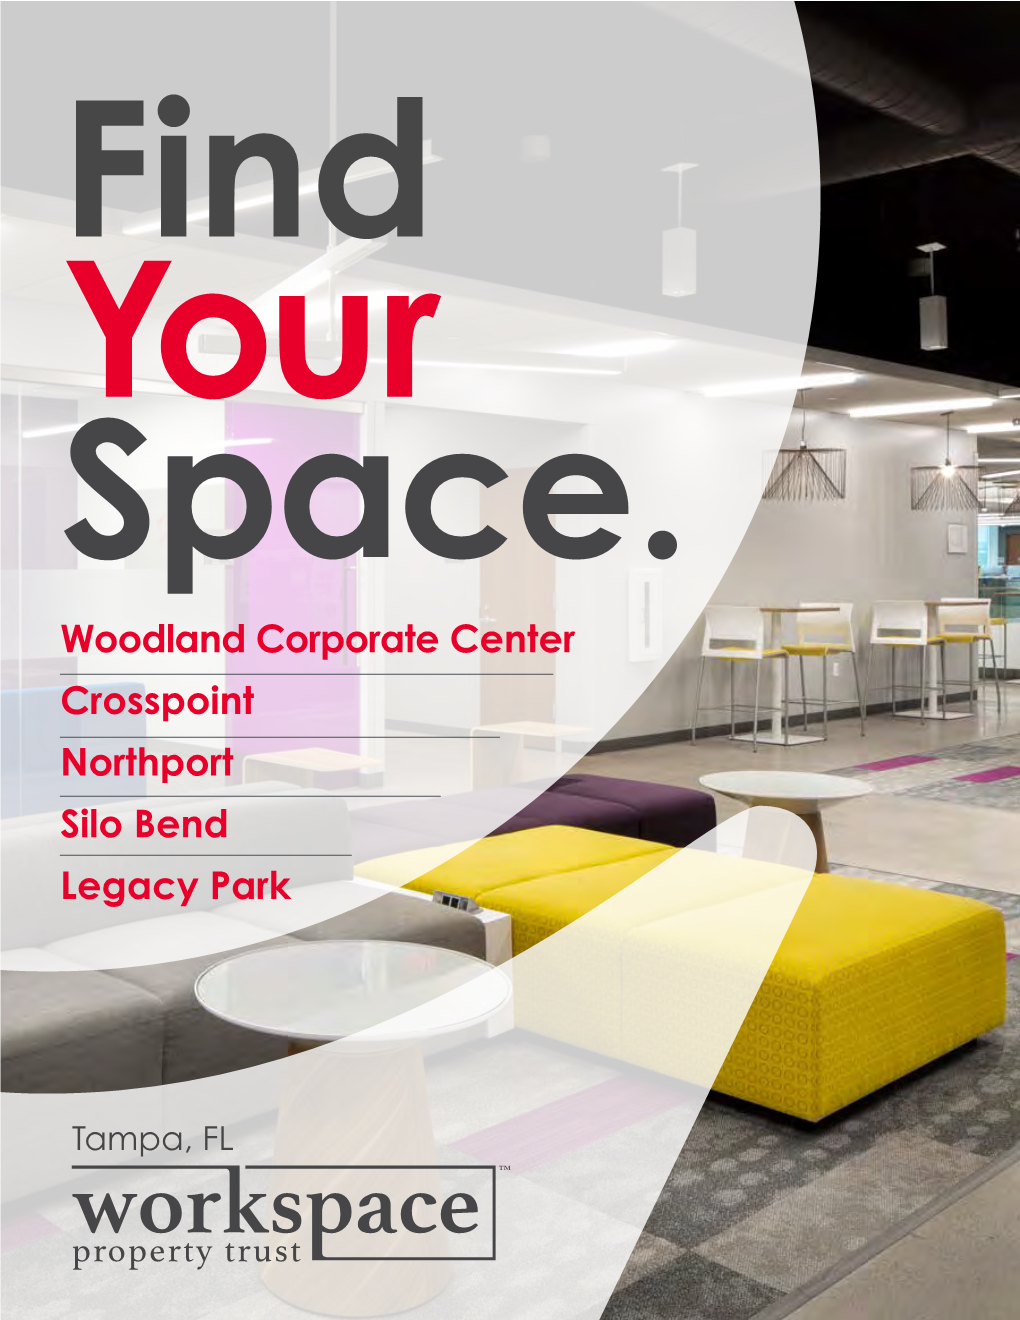 Woodland Corporate Center Crosspoint Northport Silo Bend Legacy Park